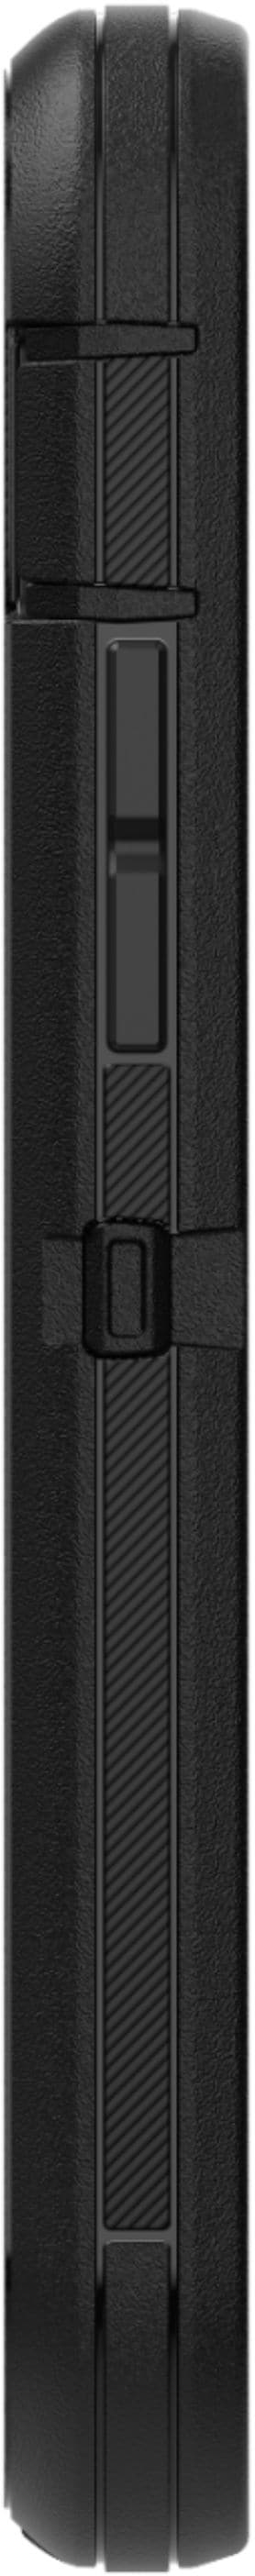 OtterBox - Defender Pro Series Case for Apple® iPhone® 11 Pro/X/Xs - Black_18